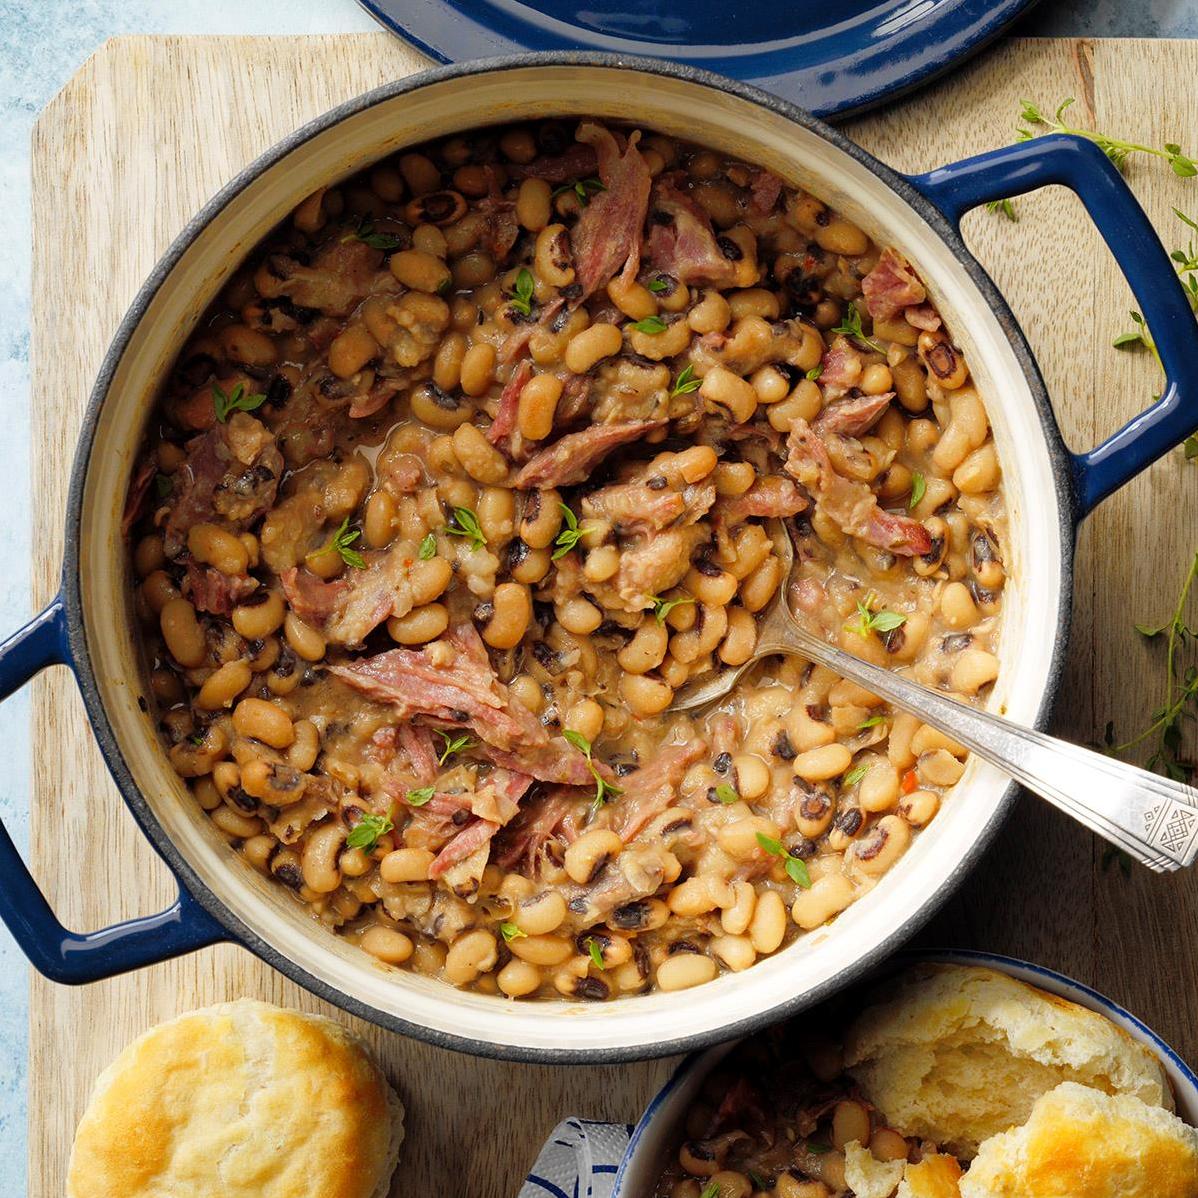  This dish is a southern classic, packed with flavor and protein.